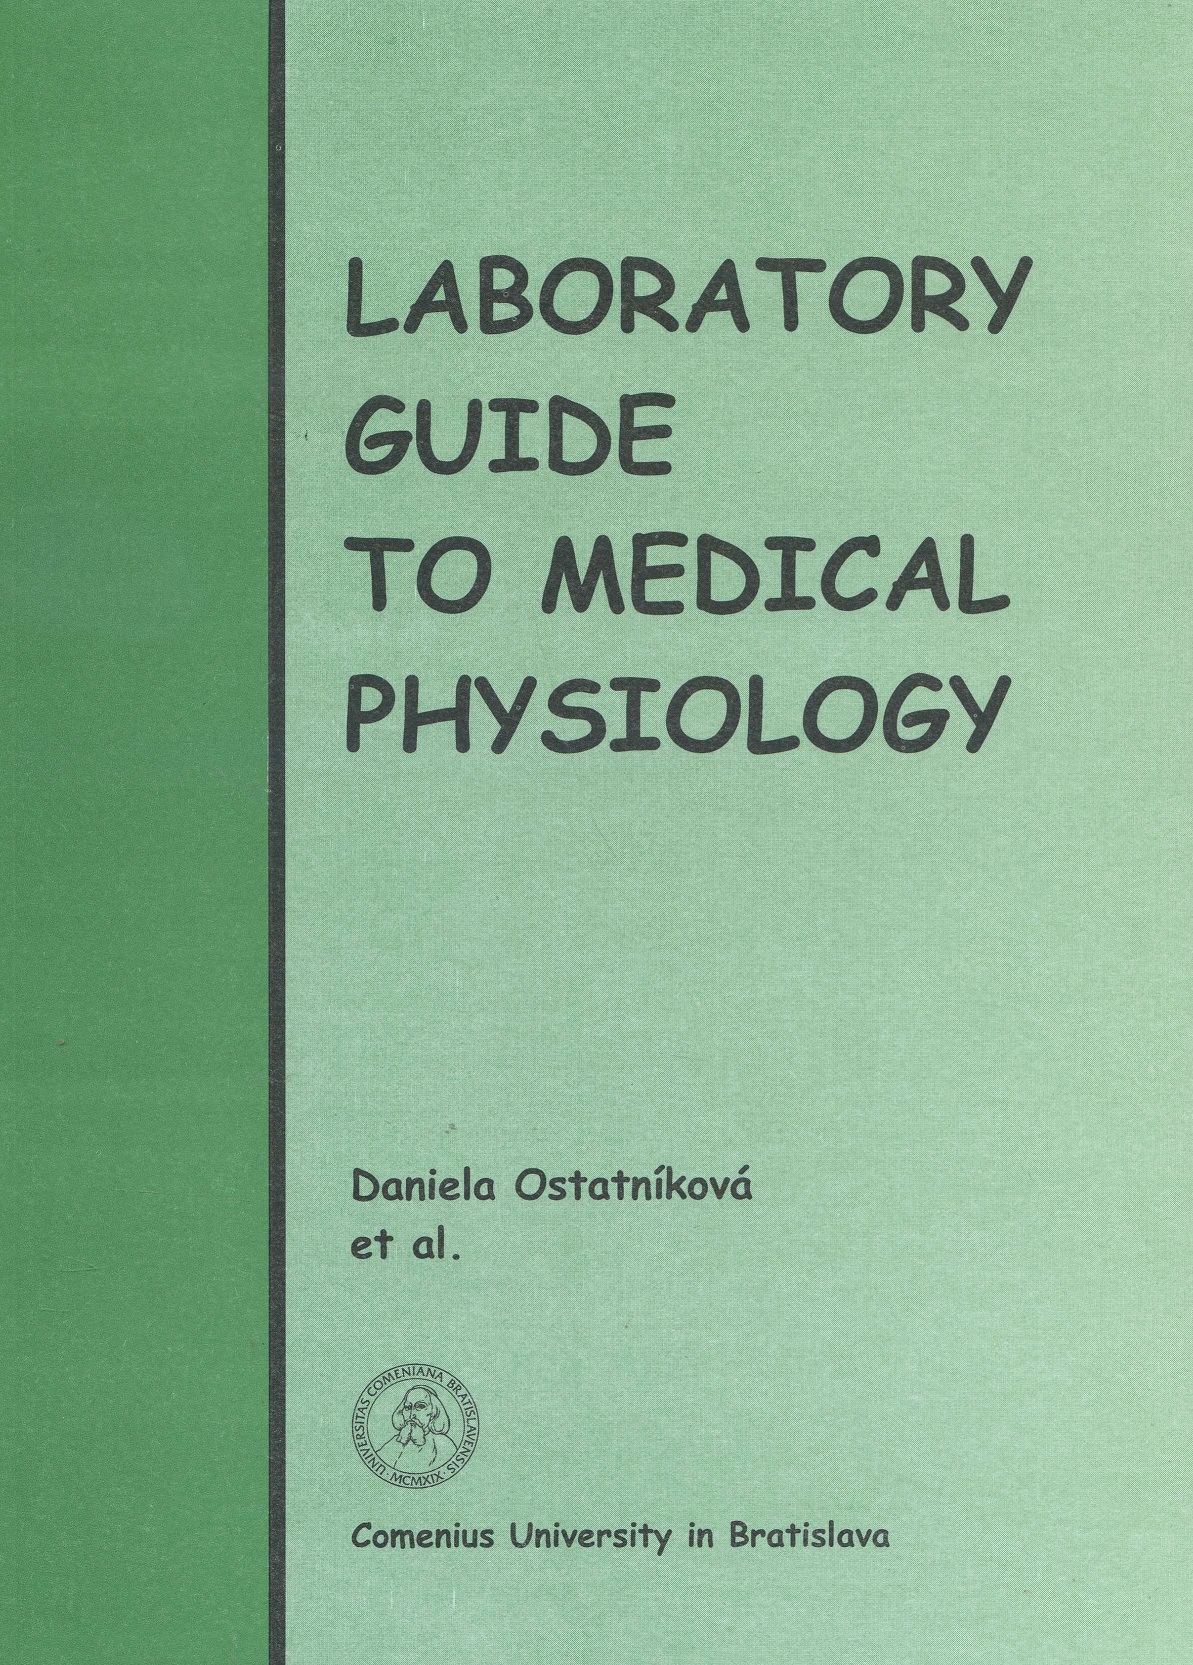 Laboratory guide to medical physiology